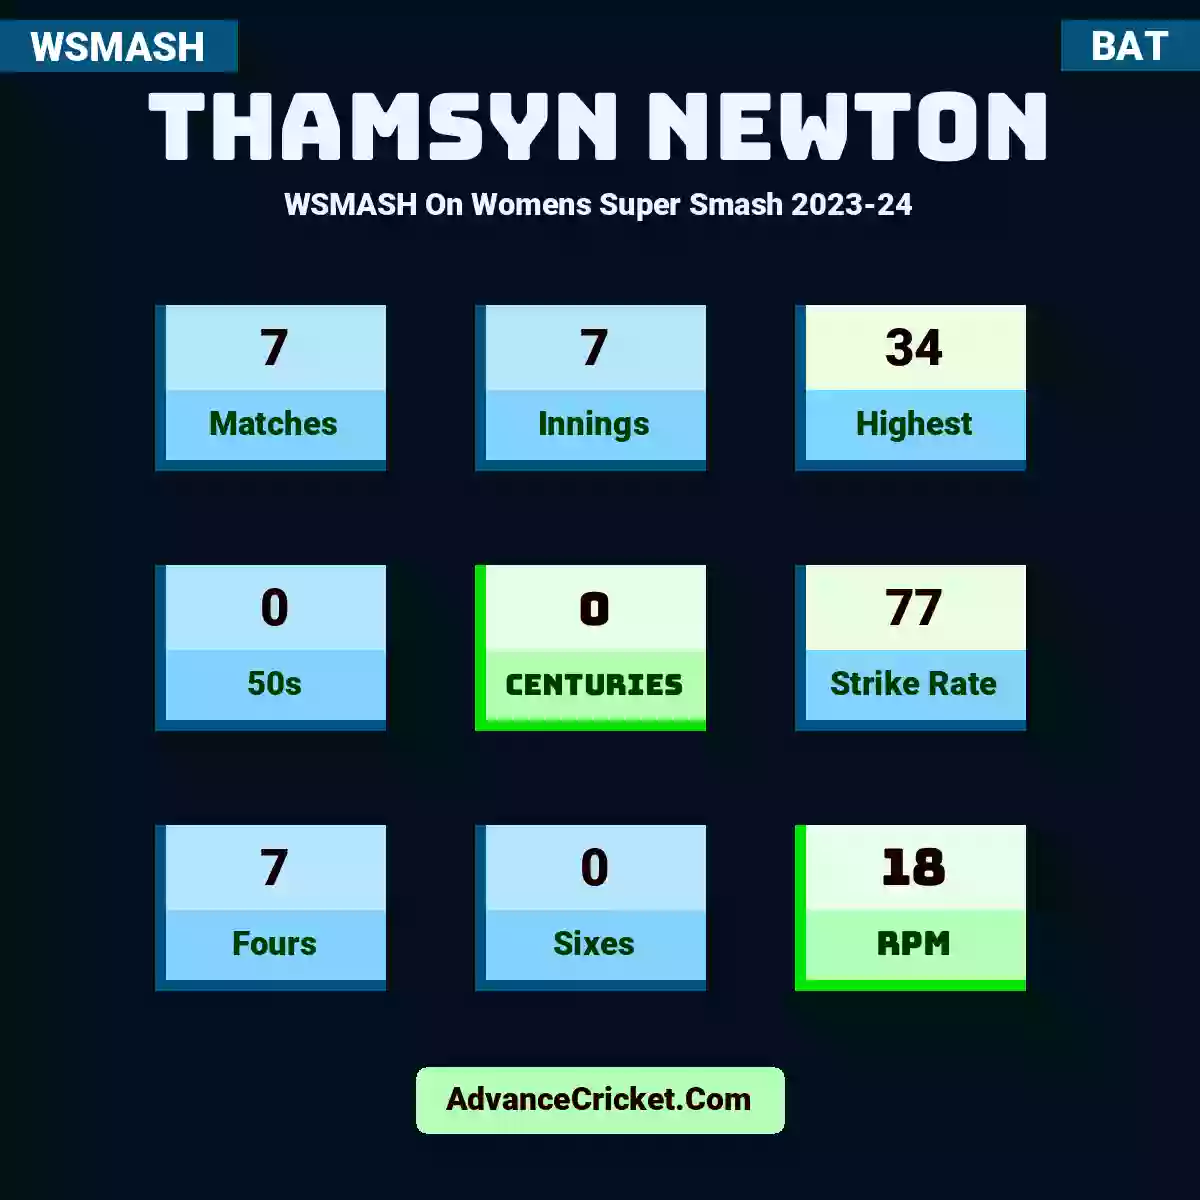 Thamsyn Newton WSMASH  On Womens Super Smash 2023-24, Thamsyn Newton played 7 matches, scored 34 runs as highest, 0 half-centuries, and 0 centuries, with a strike rate of 77. T.Newton hit 7 fours and 0 sixes, with an RPM of 18.